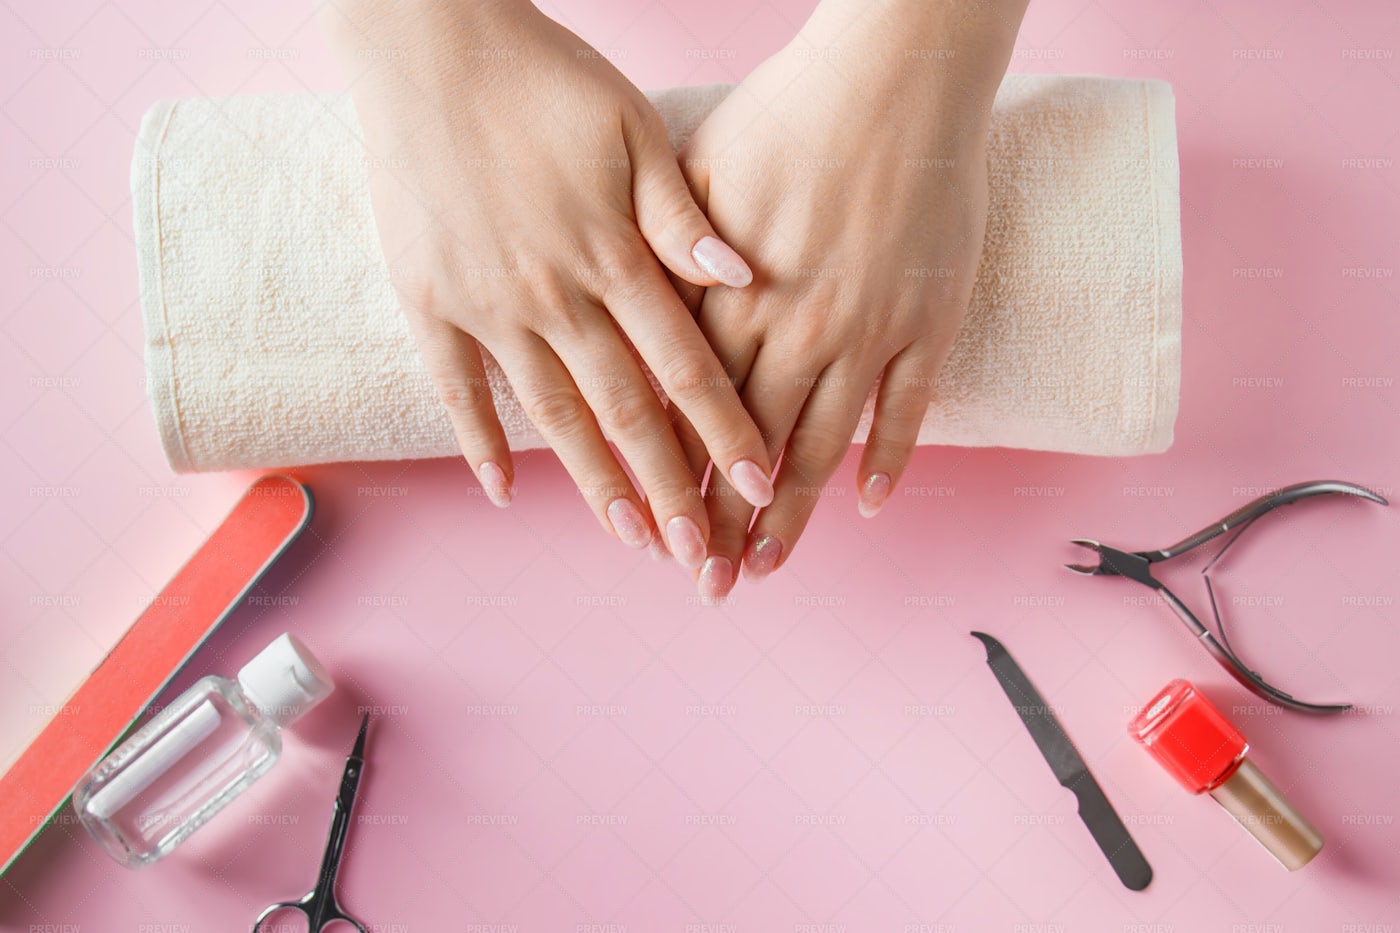 2. The Importance of Nail Care in Nursing - wide 3